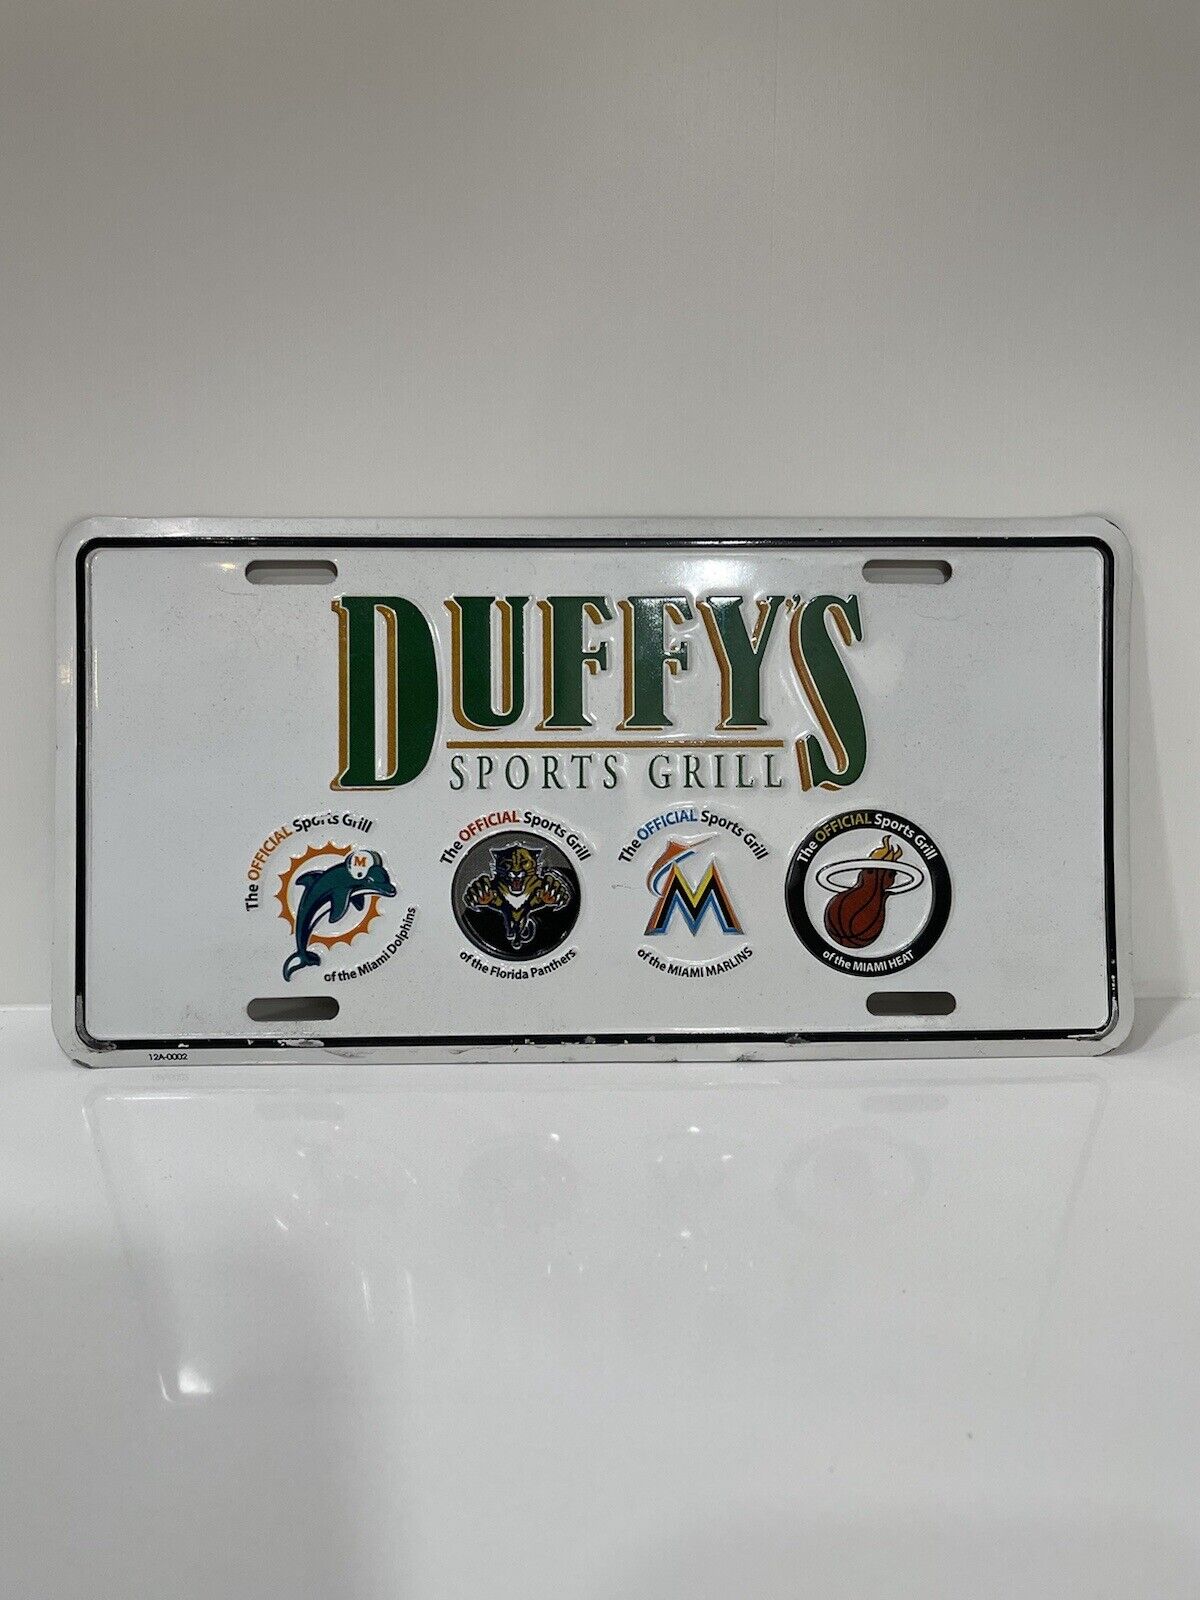 Duffy's Official Sports Grill Miami Dolphins Heat Marlins Panthers License Plate